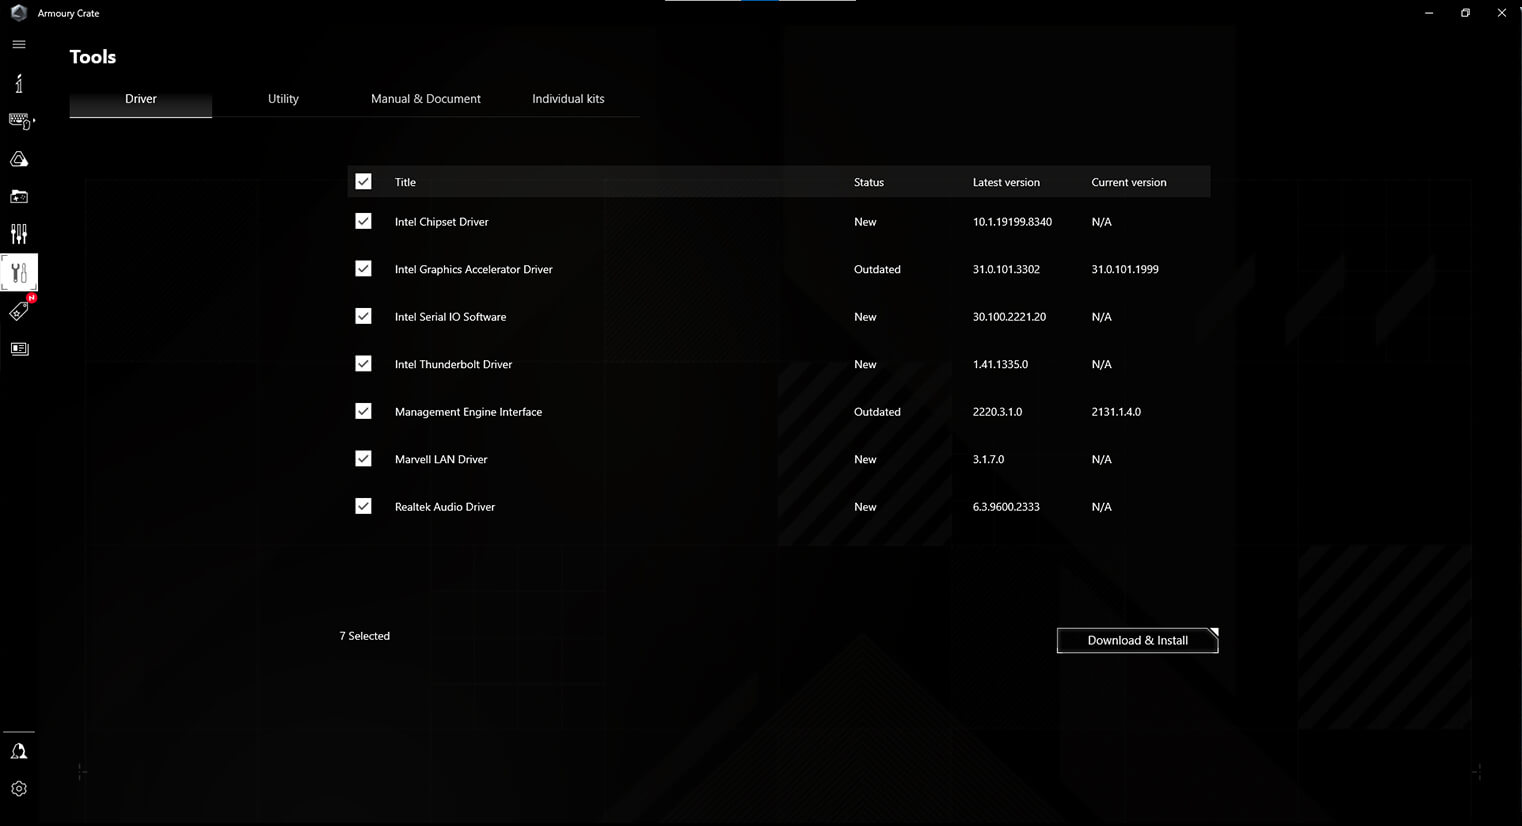 Driver and manual downloads can be found inside Armoury Crate Software